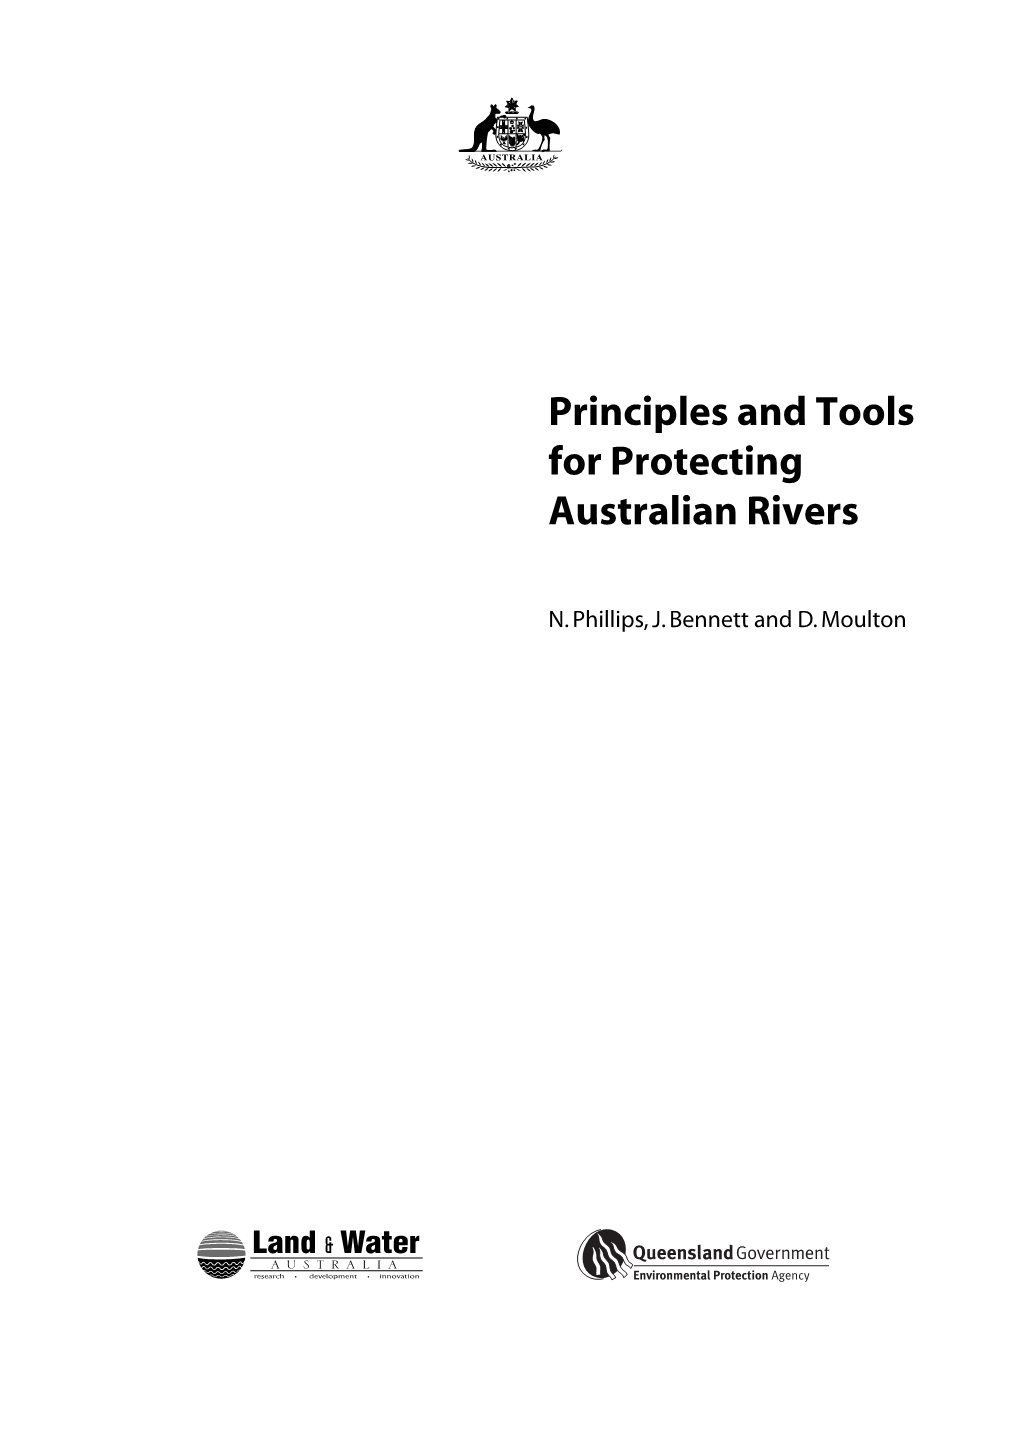 Principles and Tools for Protecting Australian Rivers